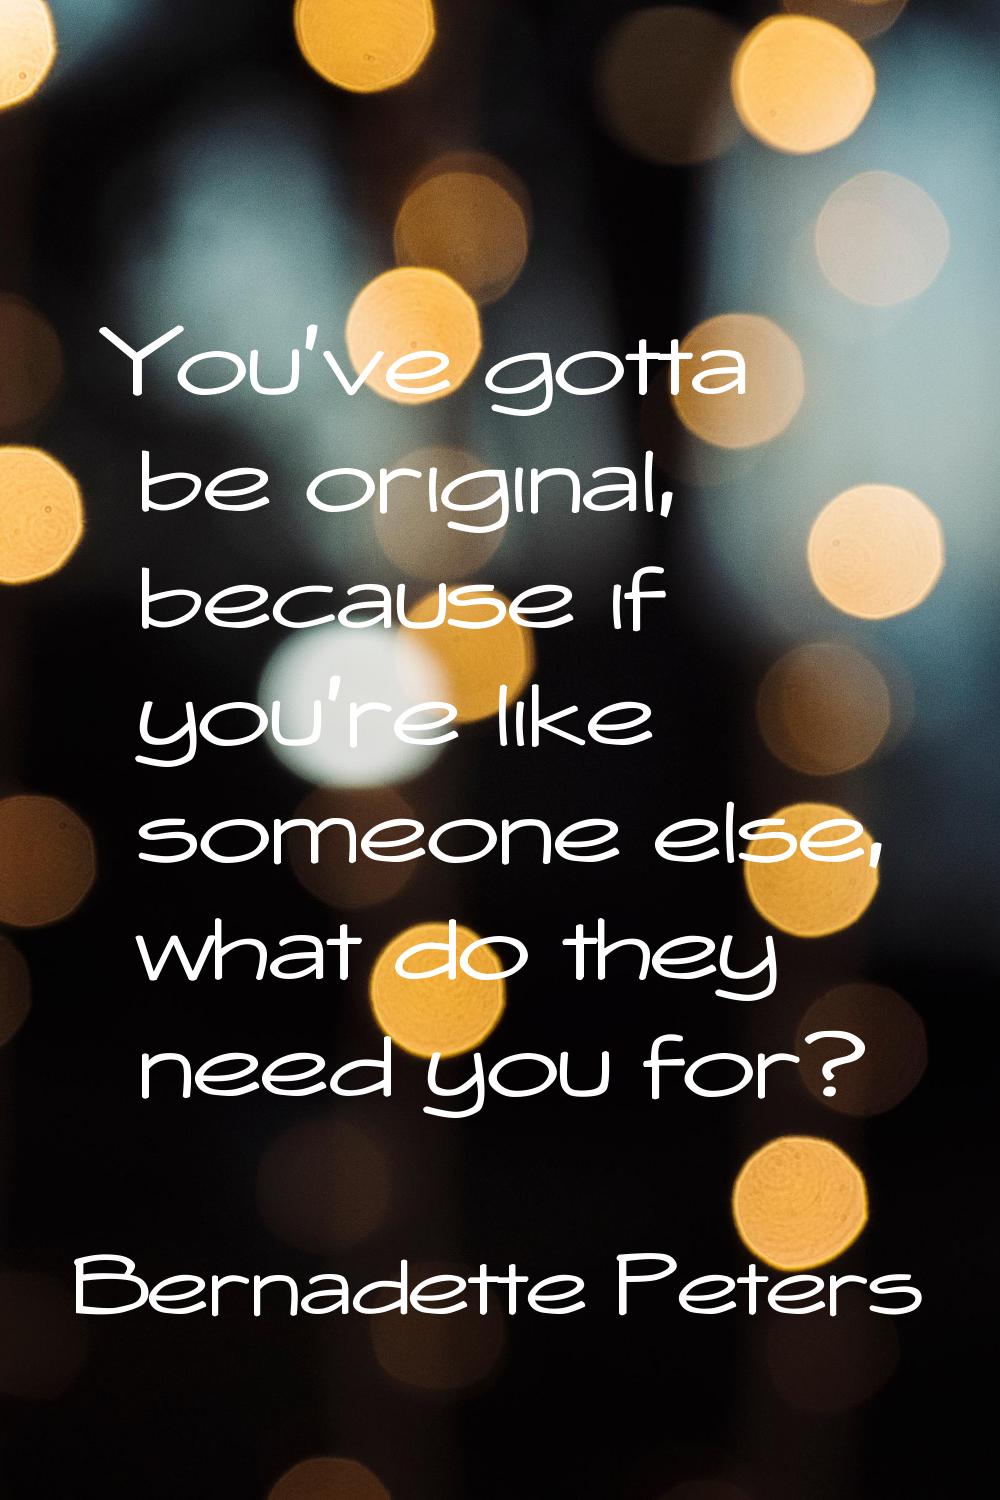 You've gotta be original, because if you're like someone else, what do they need you for?